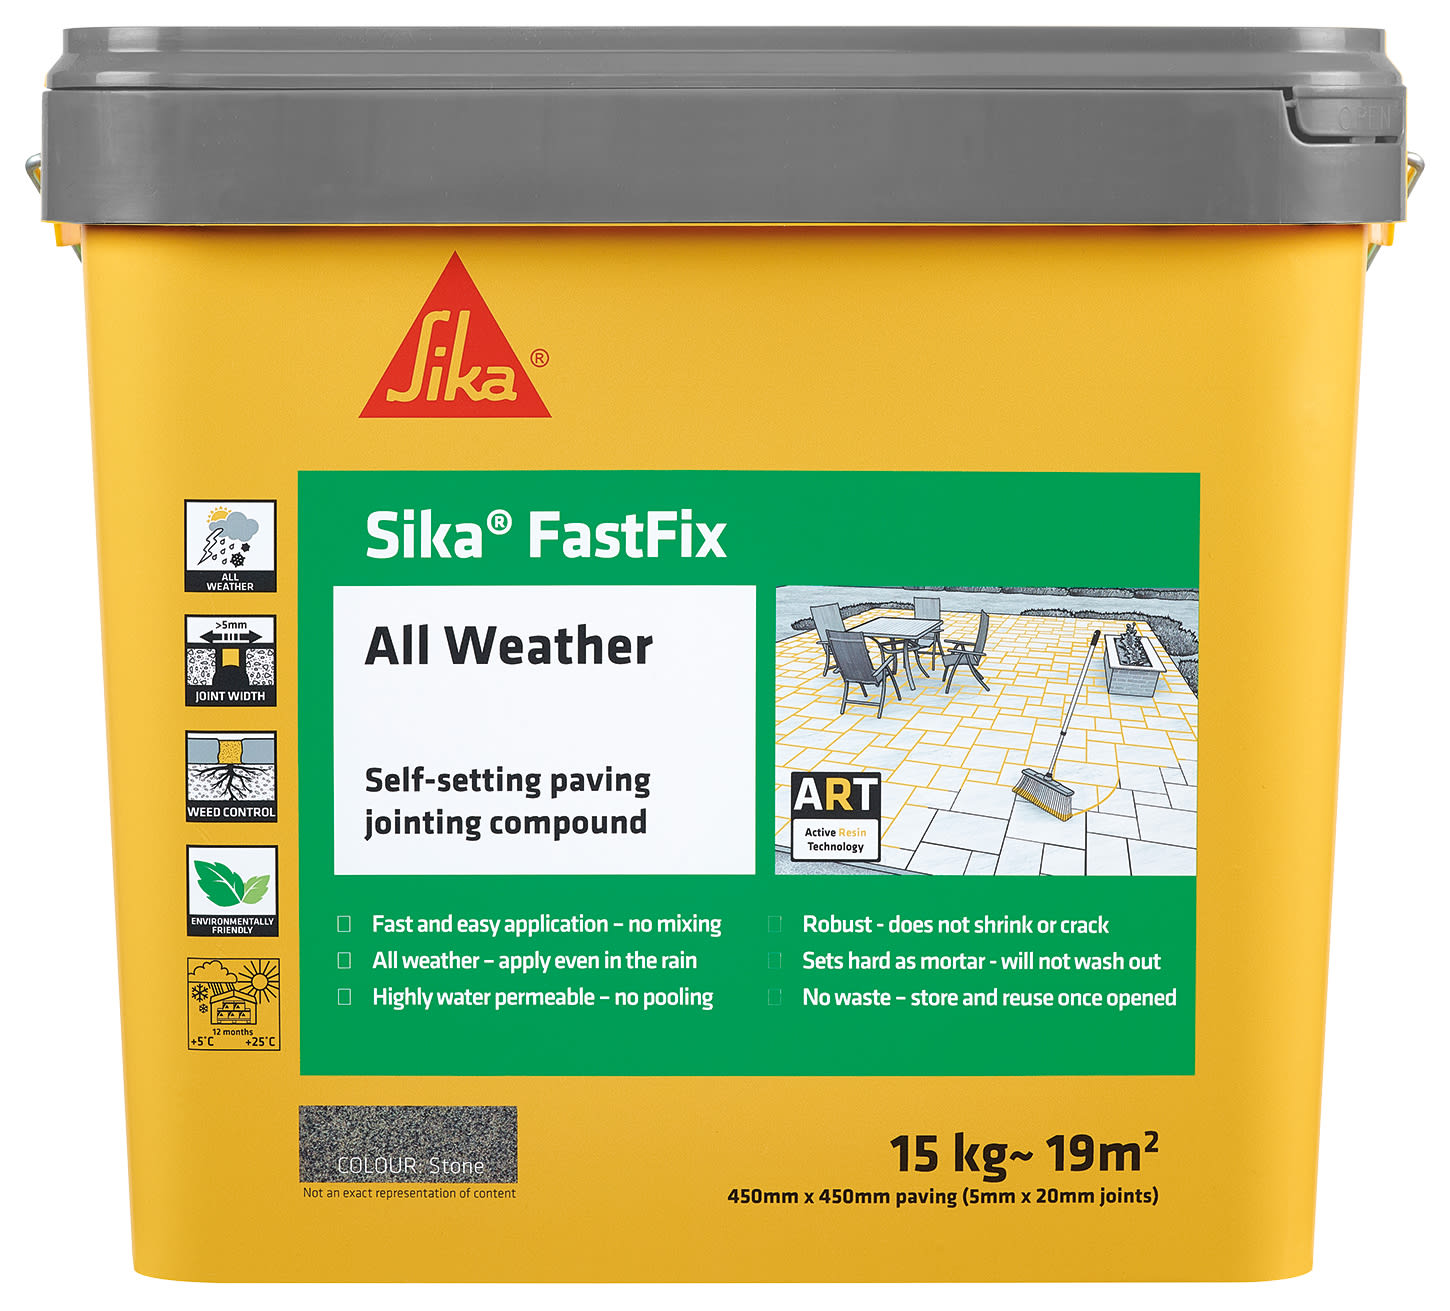 Sika FastFix All Weather Stone Paving Jointing Compound